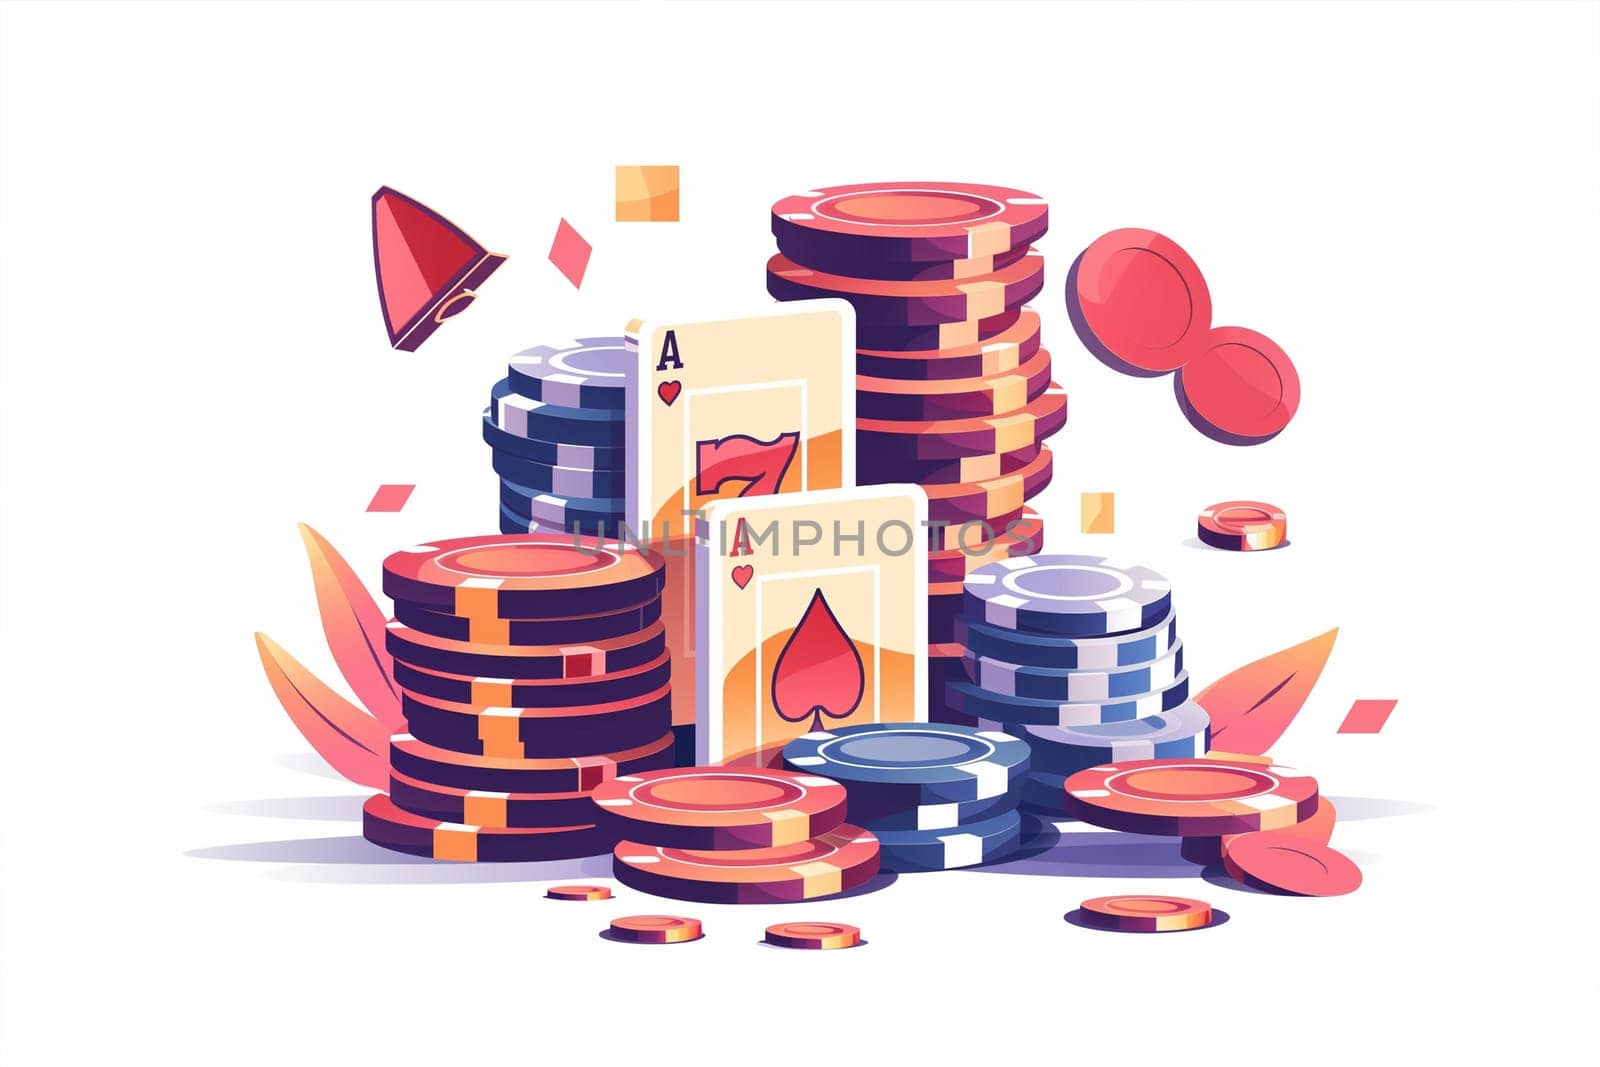 Pile of Poker Chips and Playing Cards on White Background by Sd28DimoN_1976